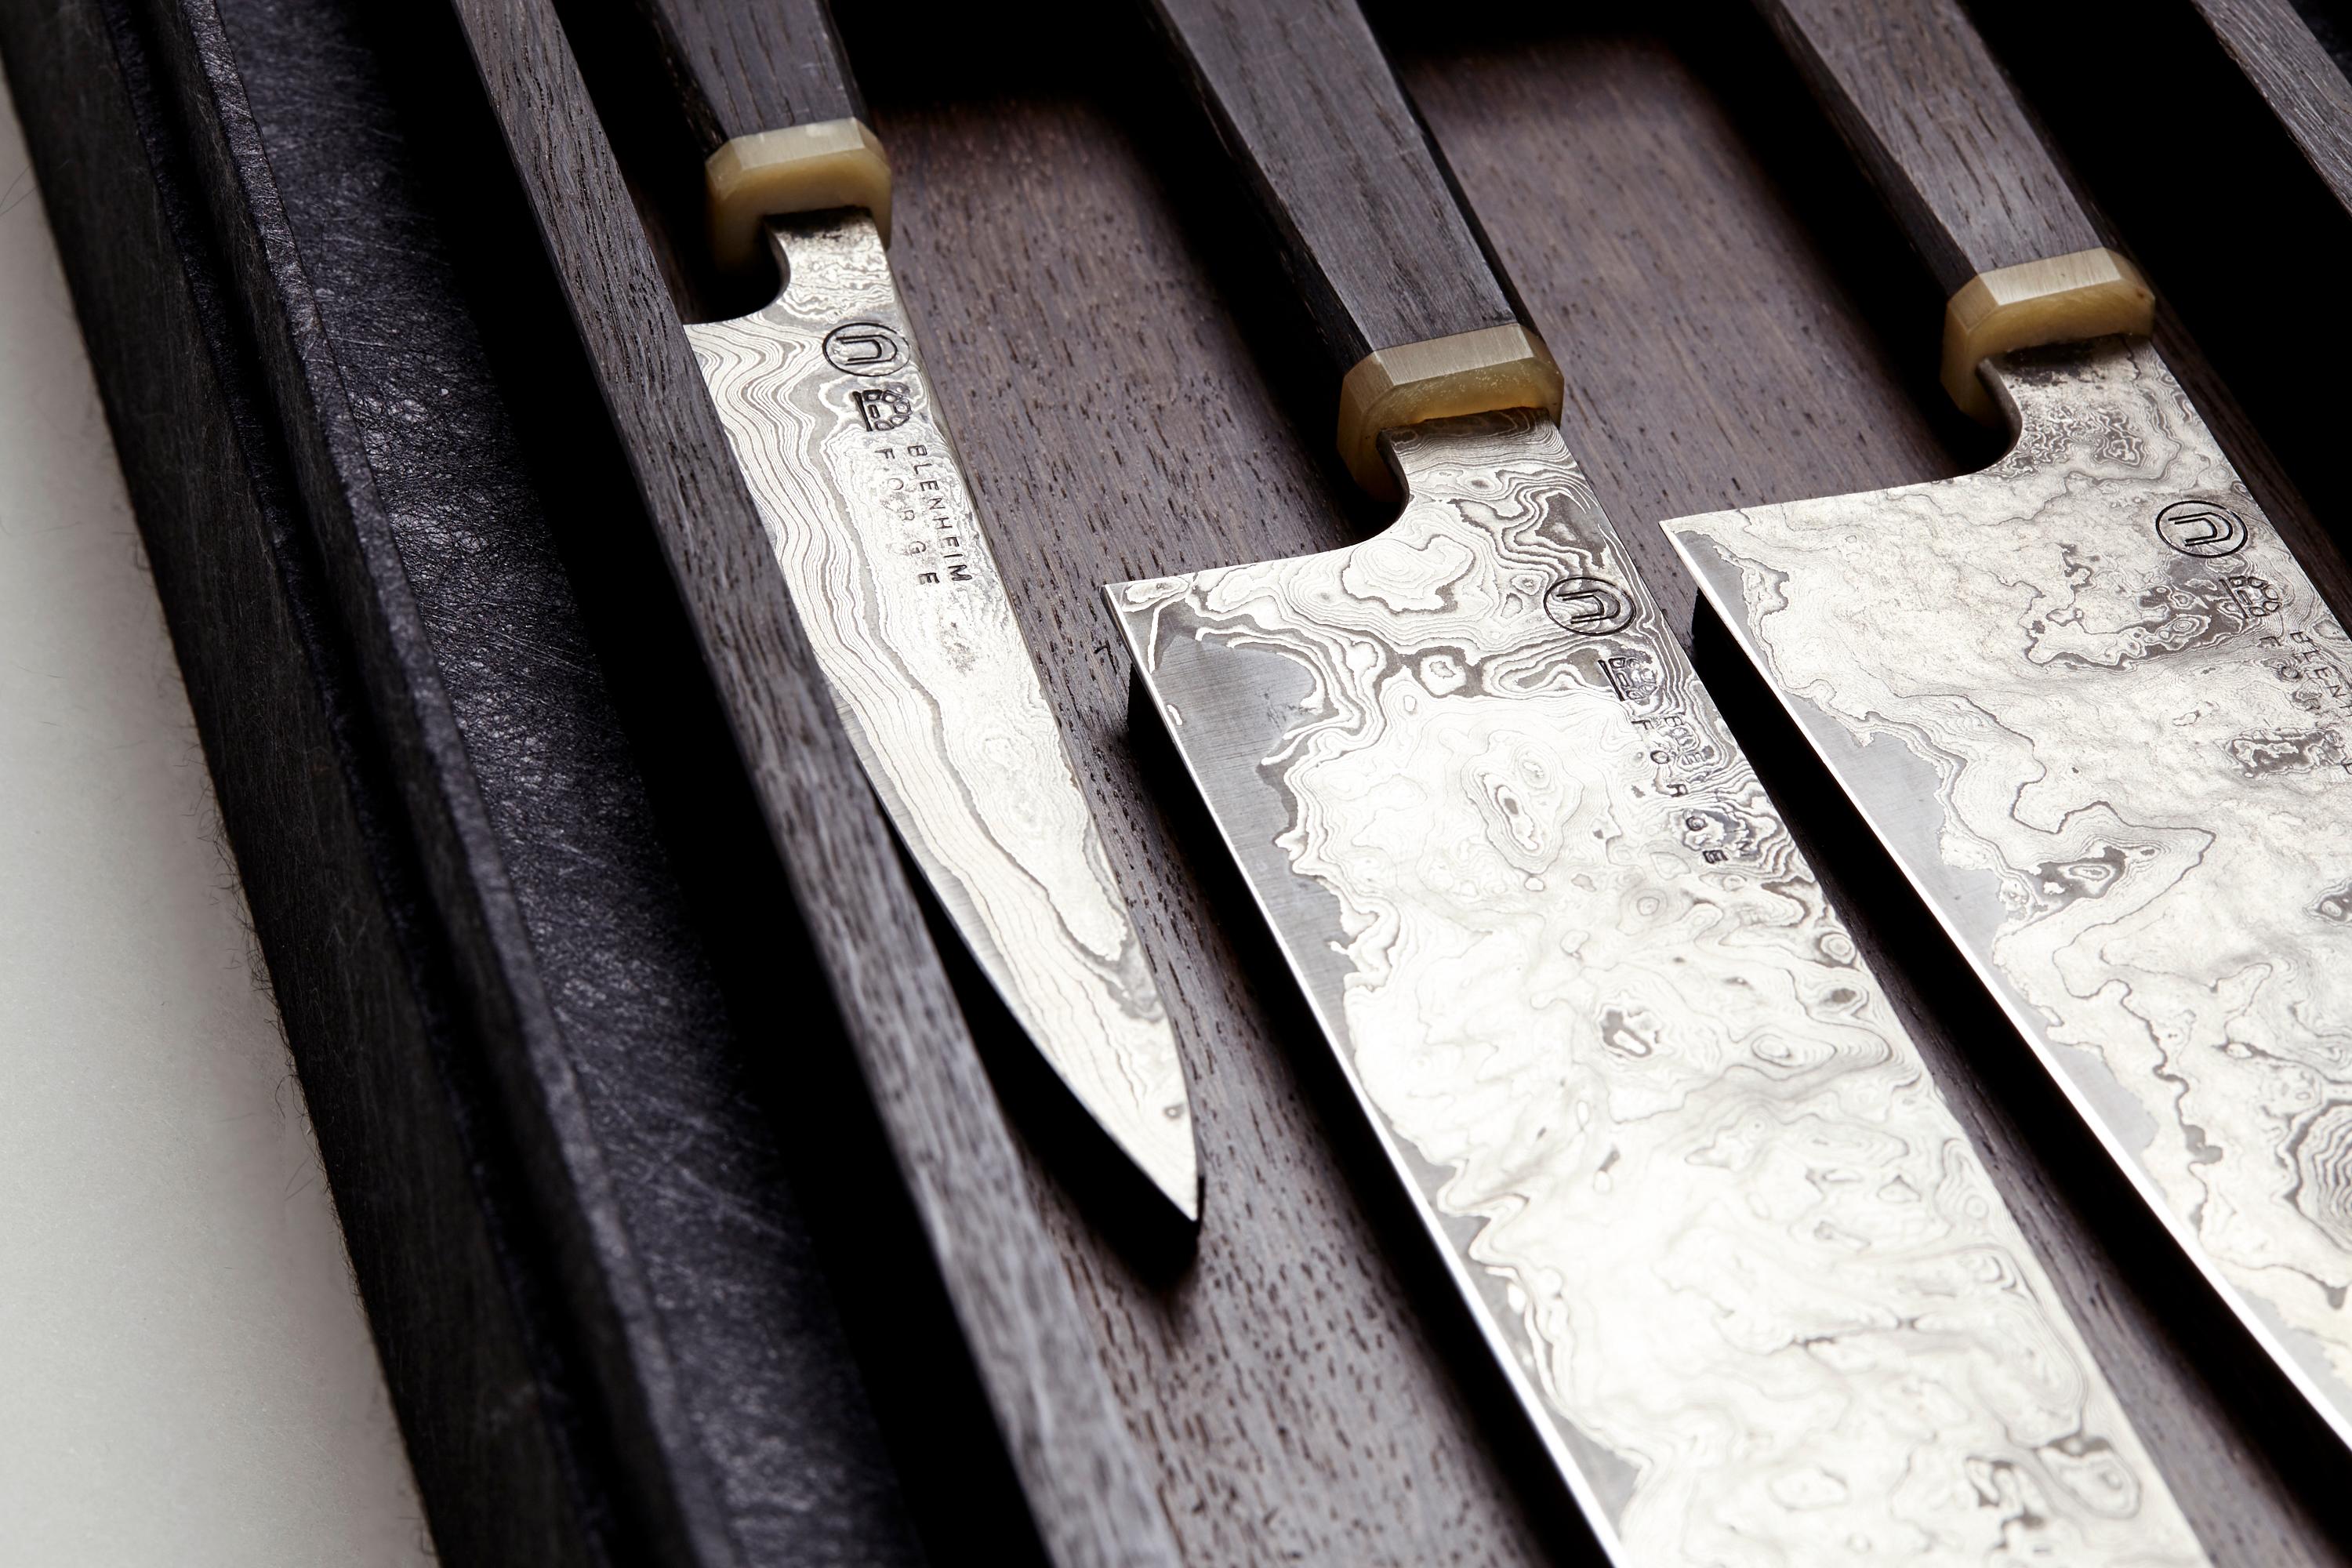 DOVEDALE’S debut project is a set of Japanese-inspired Damascus steel knives. The folded blue paper steel blades are set in wooden handles and arranged in a presentation box, both crafted out of thousands-of-years-old petrified bog oak. The blades